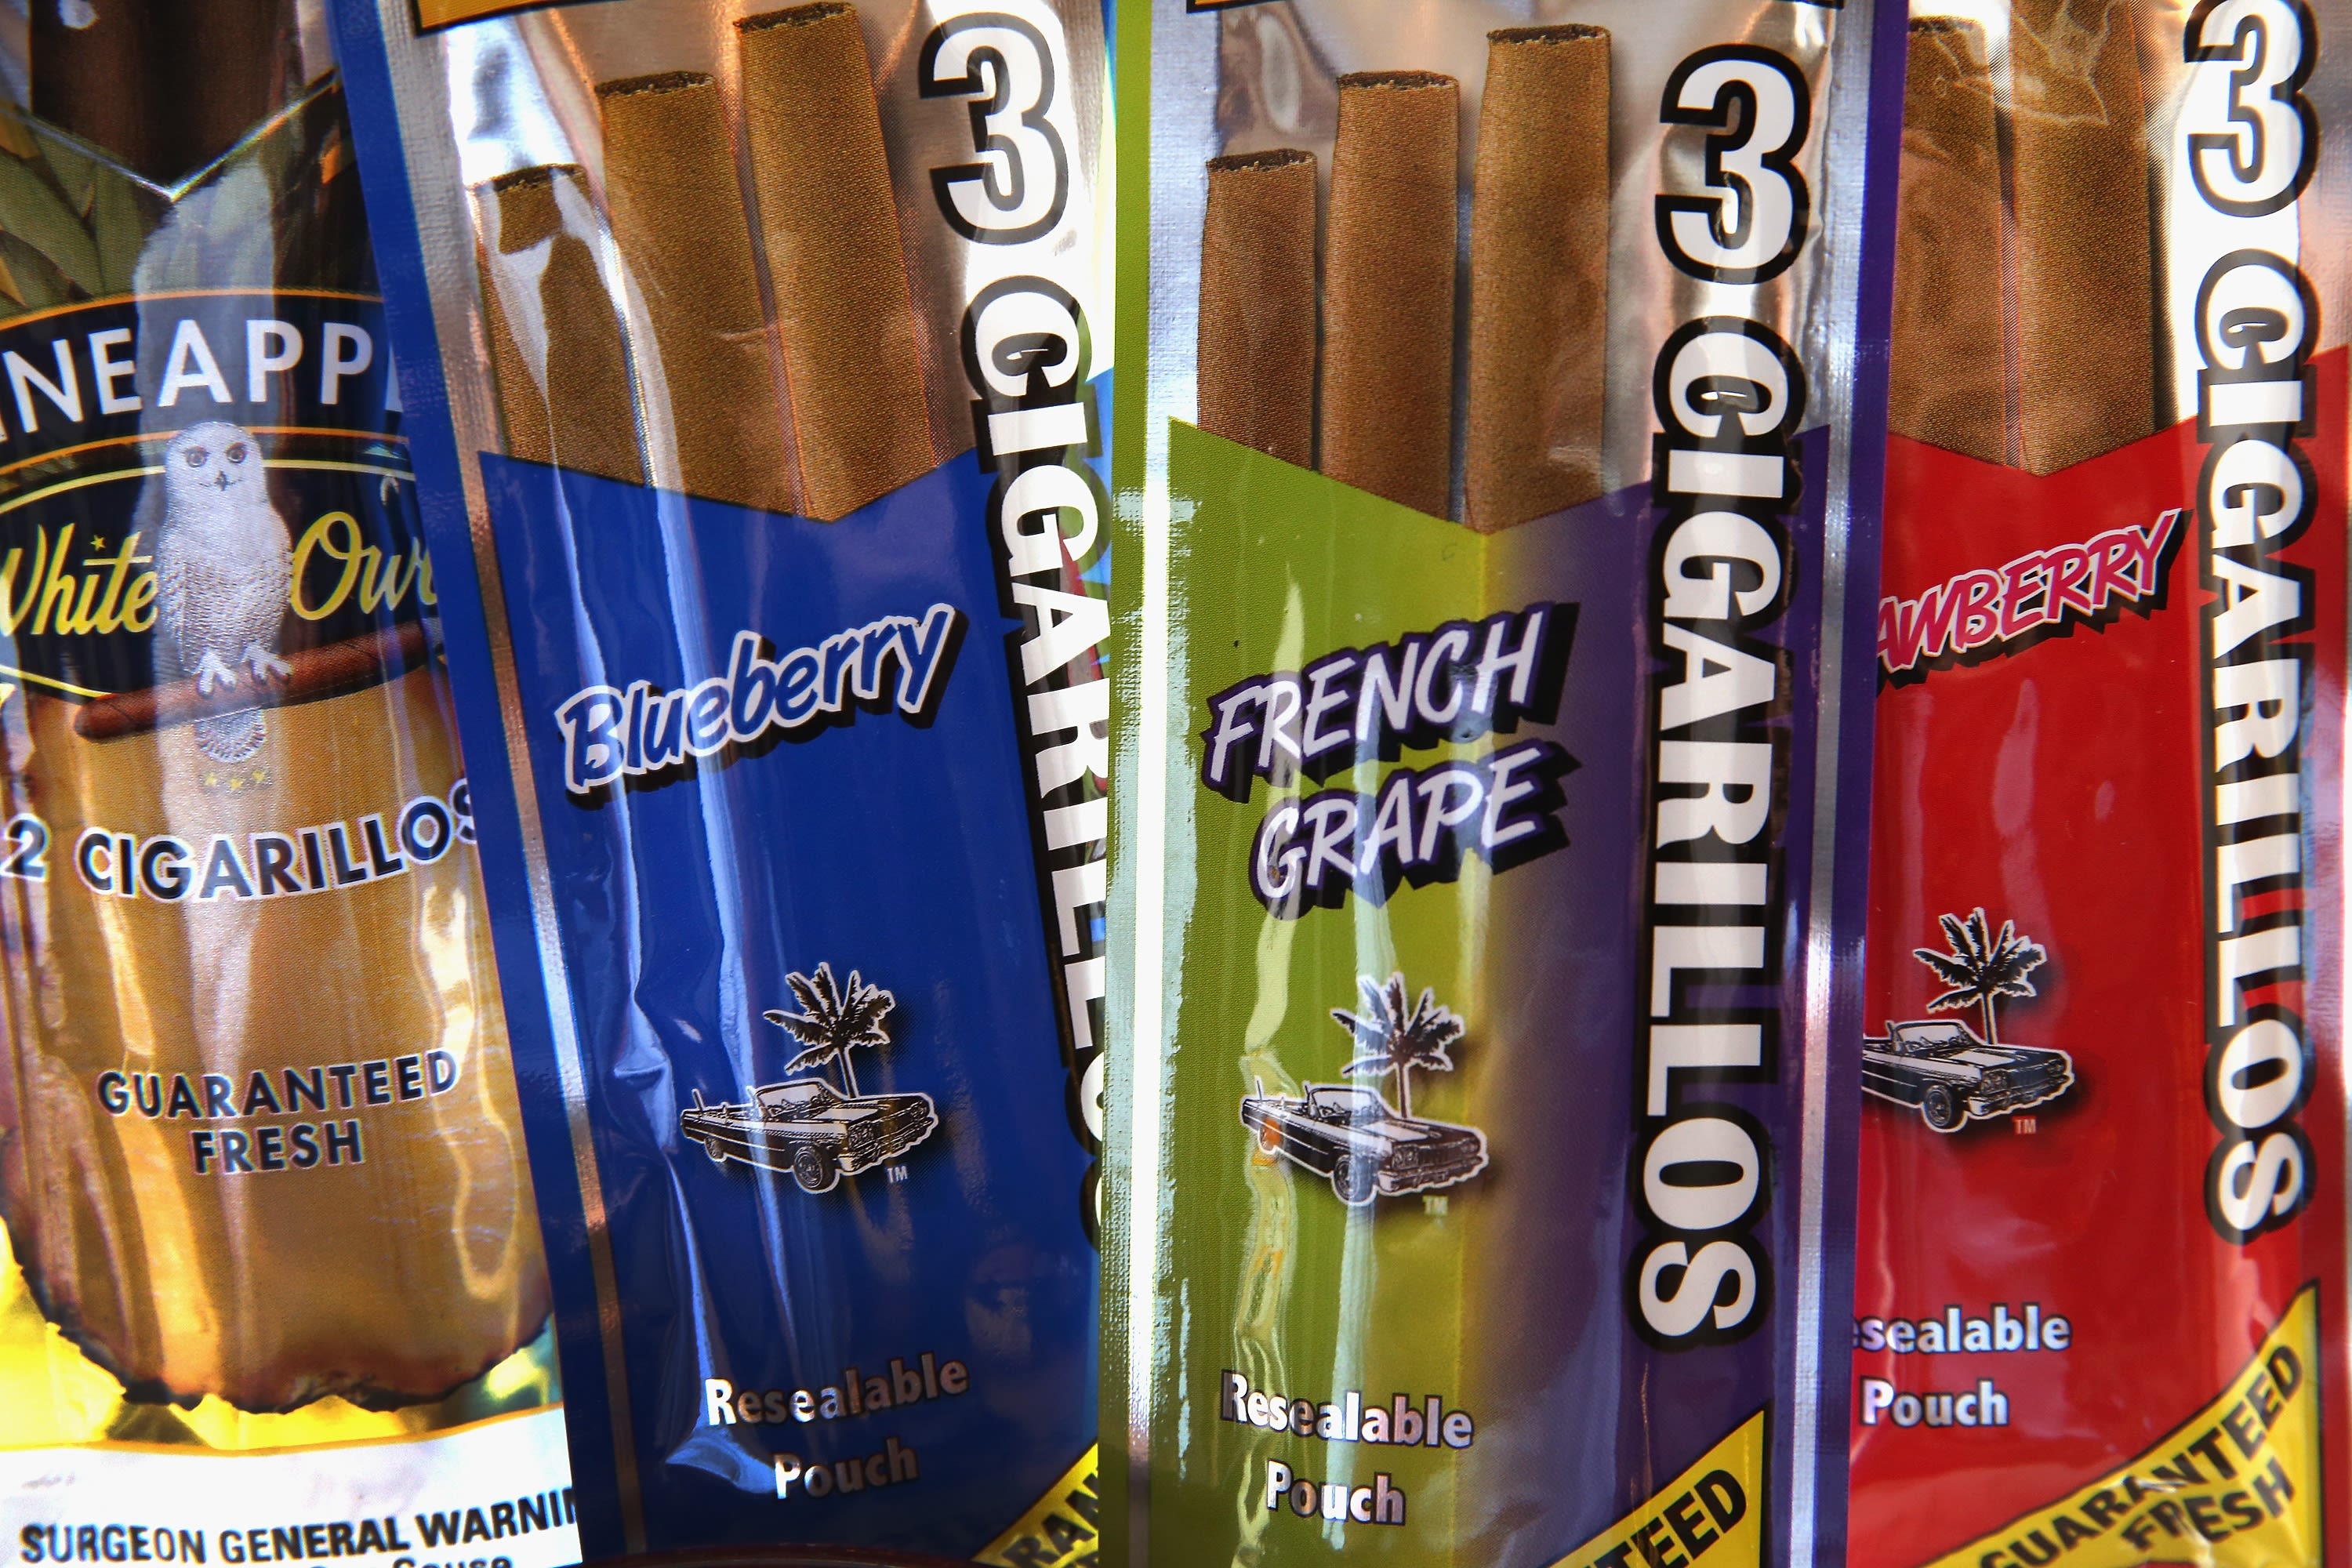 flavored cigars good